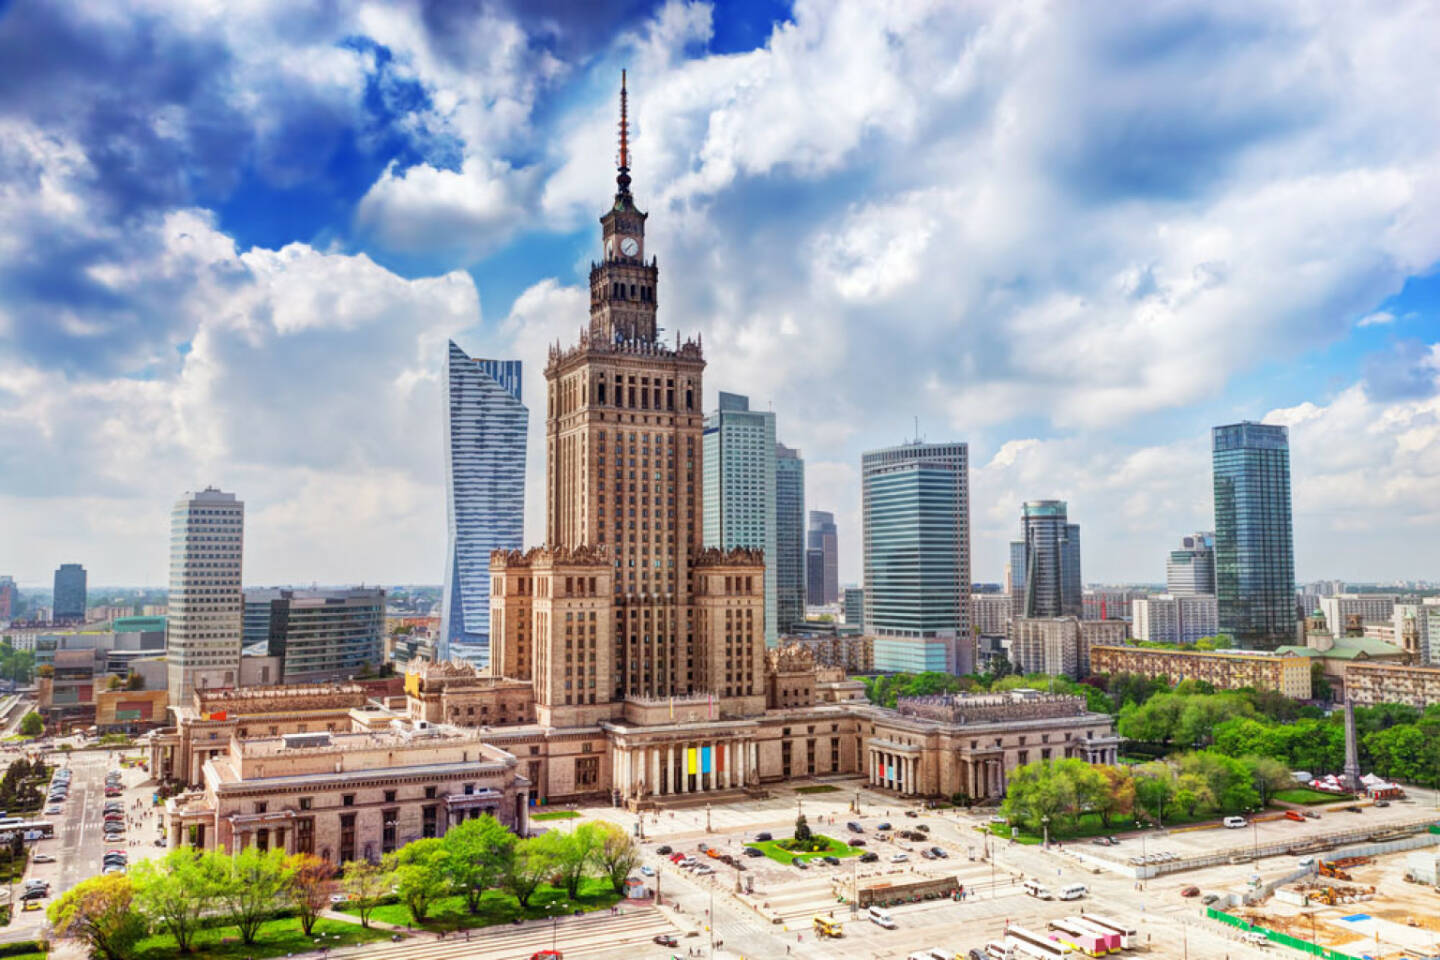 Warschau, Polen, http://www.shutterstock.com/de/pic-190990370/stock-photo-warsaw-poland-aerial-view-palace-of-culture-and-science-and-downtown-business-skyscrapers-city.html